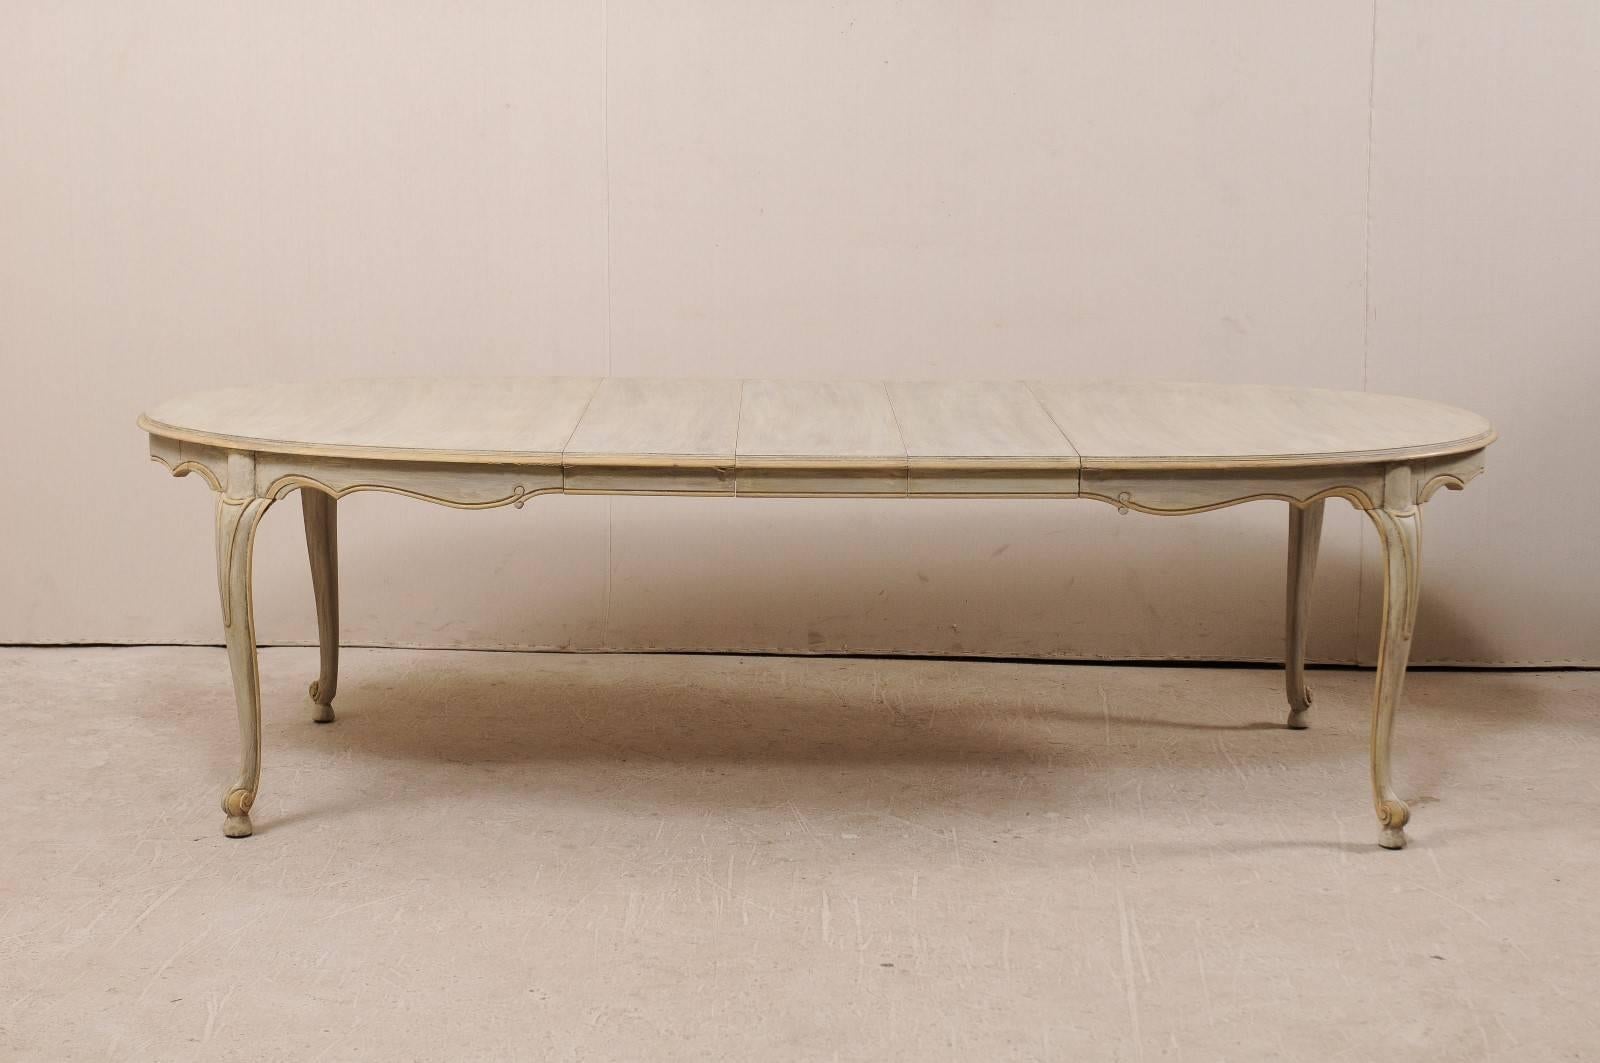 An American mid-20th century oval dining table. This dining painted wood dining table features a nicely carved and outlined skirt and is raised on four cabriole legs with scrolling details at their feet. The table has three leaves which allows for